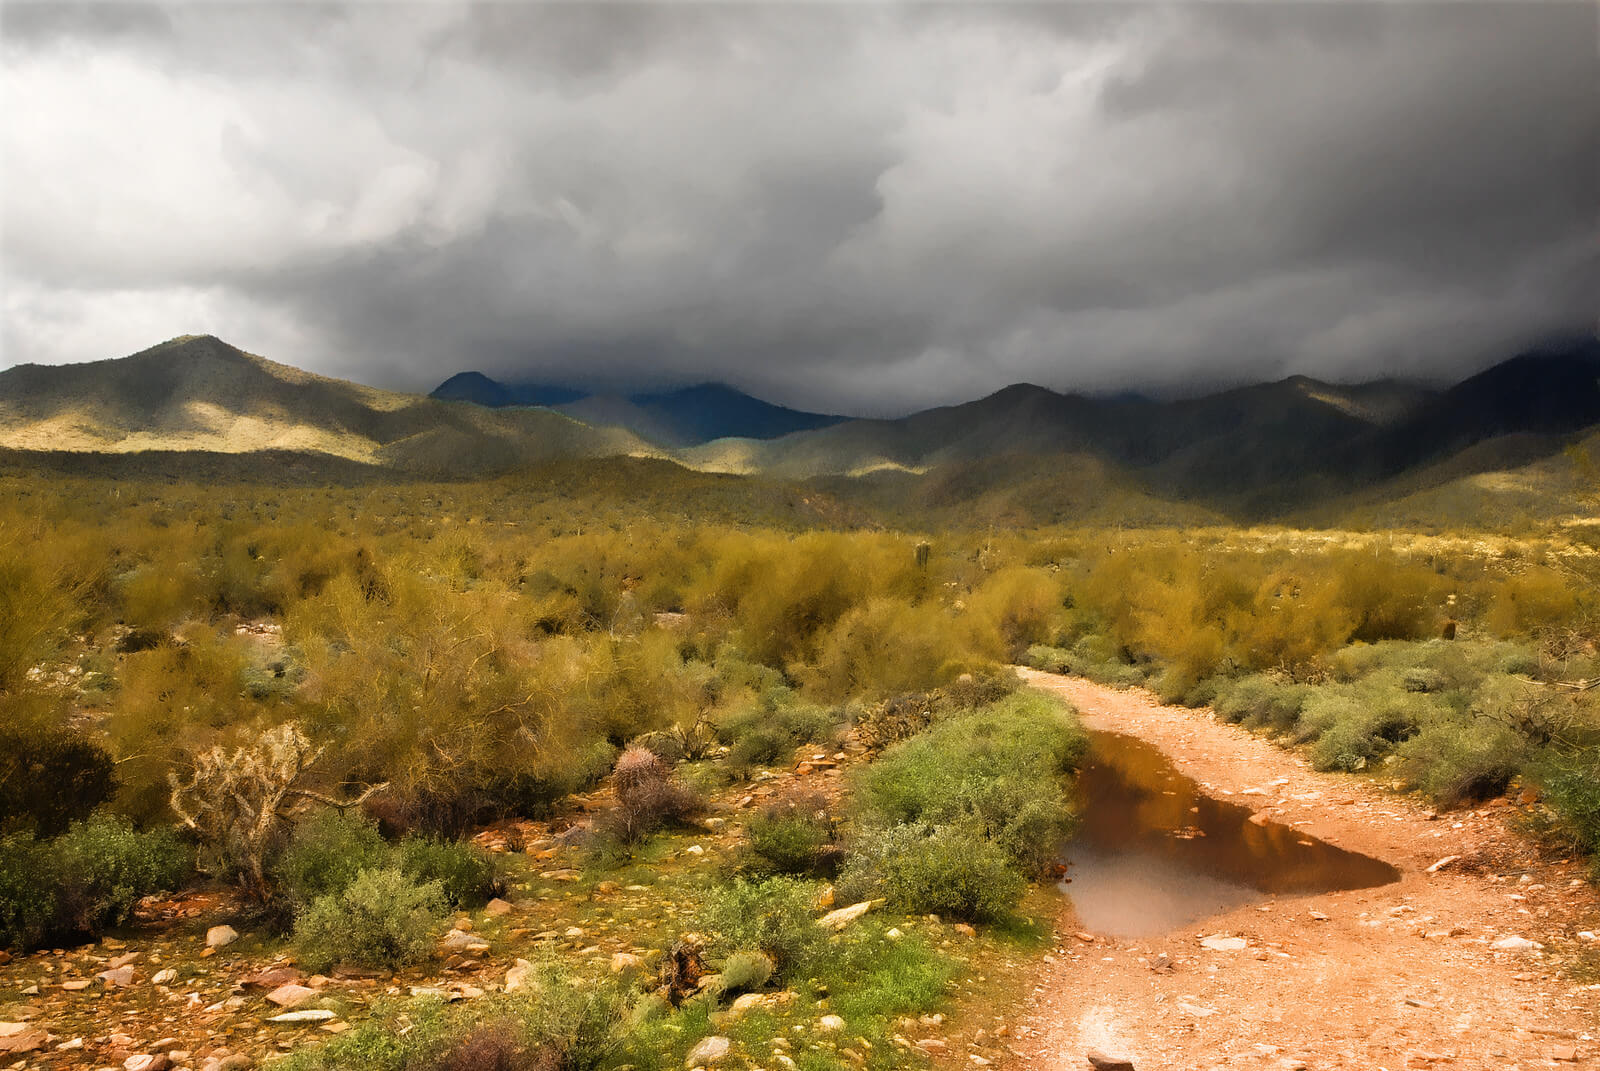 Monsoons bring thick rain clouds over the desert landscape. Flickr User Marc